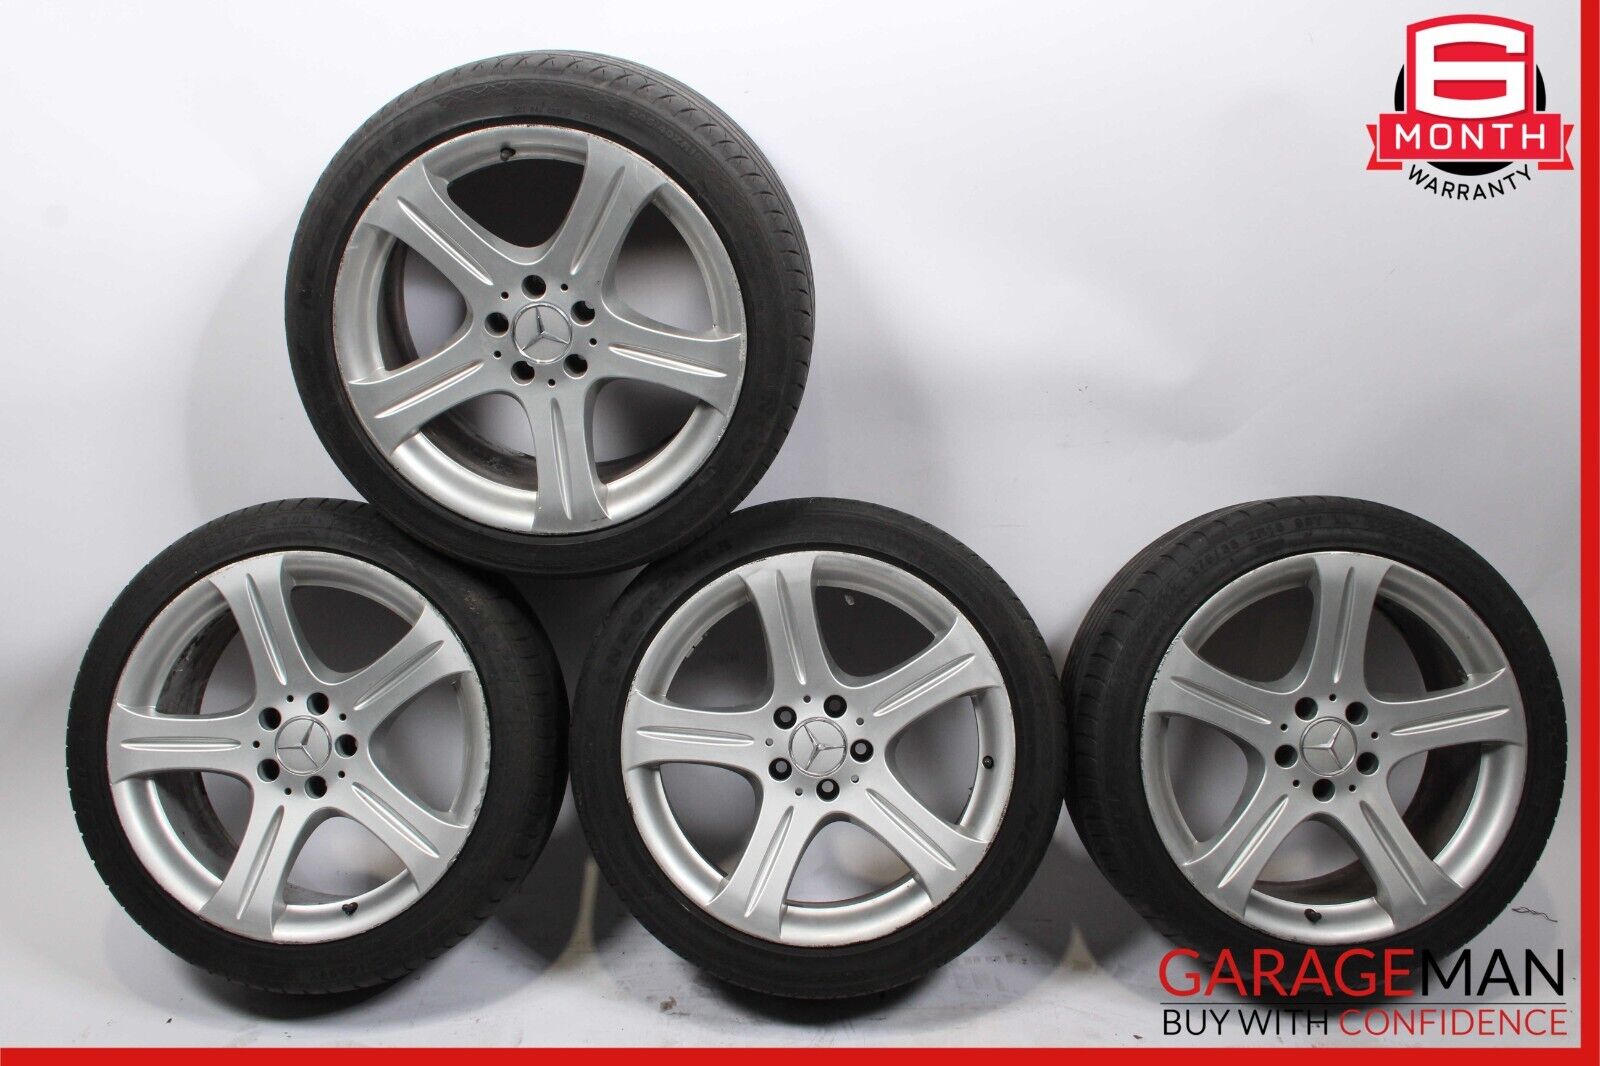 06-11 Mercedes W219 CLS350 CLS550 Staggered R18 8.5x9.5 Wheel Tire Rim Set of 4